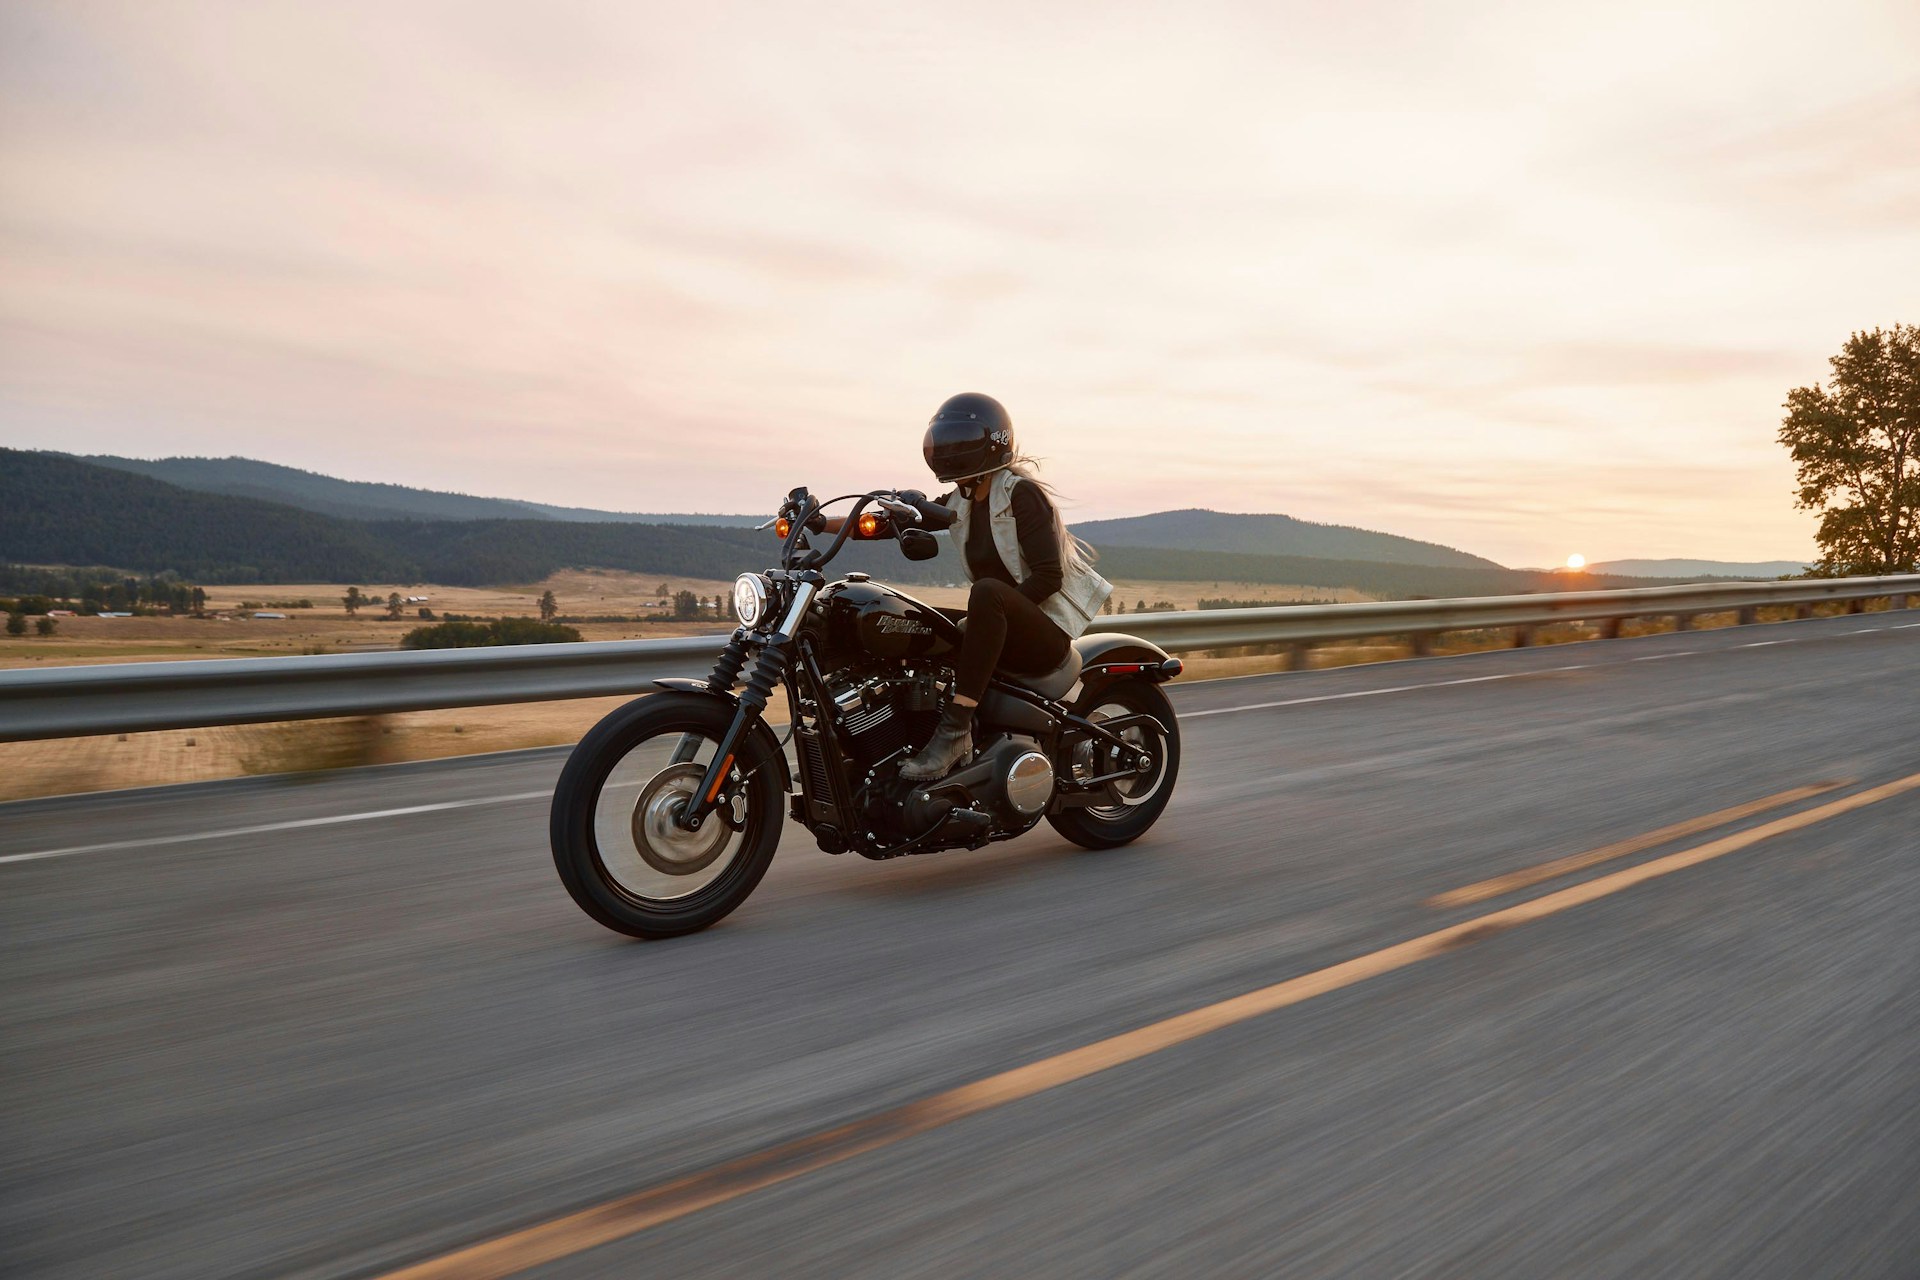 Automobiles and Their Impact on Motorcycle Safety in Florida